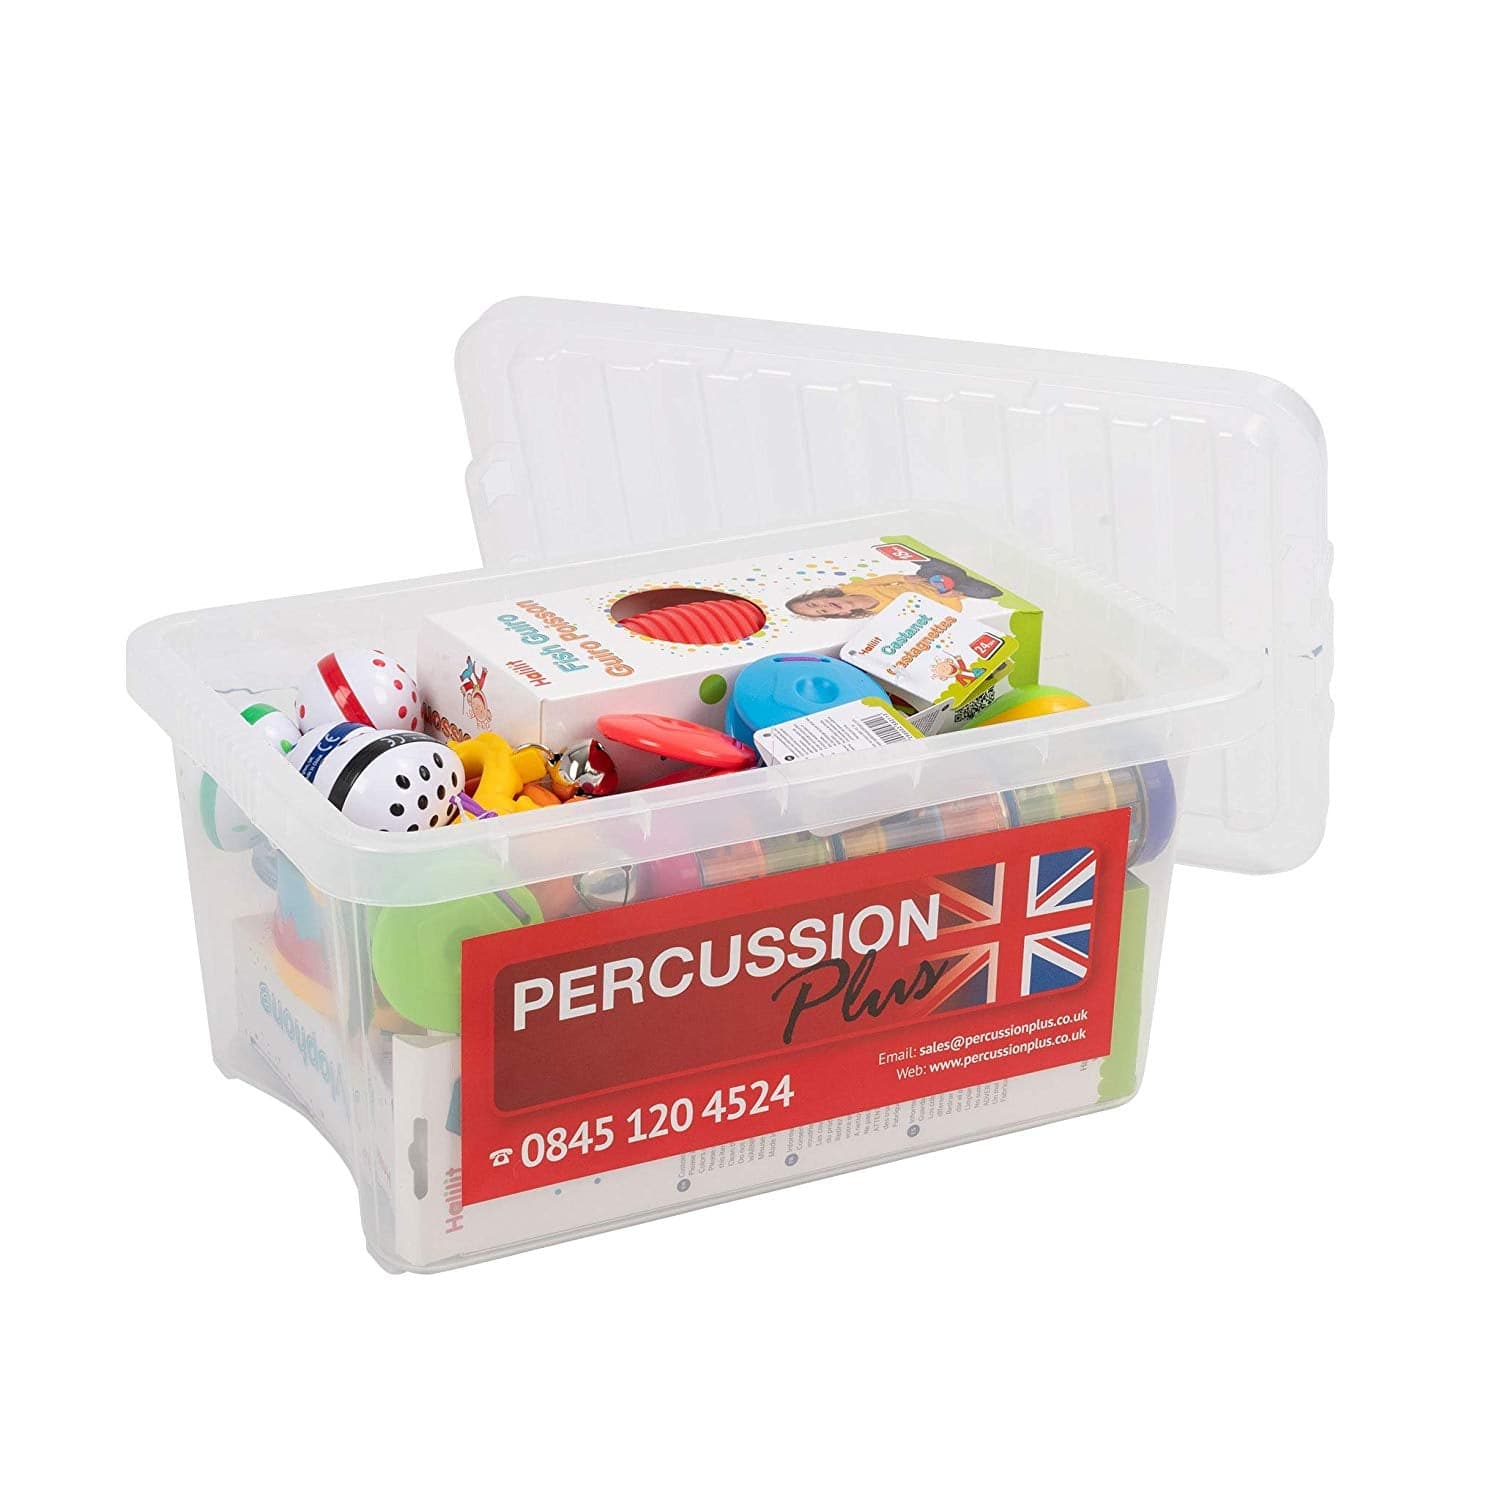 Small hands classroom pack, The best way for the whole class to get busy making music and interesting sounds! The Small hands classroom pack contains a fantastic quality selection of hand held percussion for early years. This Small hands classroom pack is the best way for the whole class to get busy making music and interesting sounds! It is a fantastic quality selection of hand held percussion for early years, supplied in strong storage box with lid. Great variety of hand held percussion items Ideal for cl